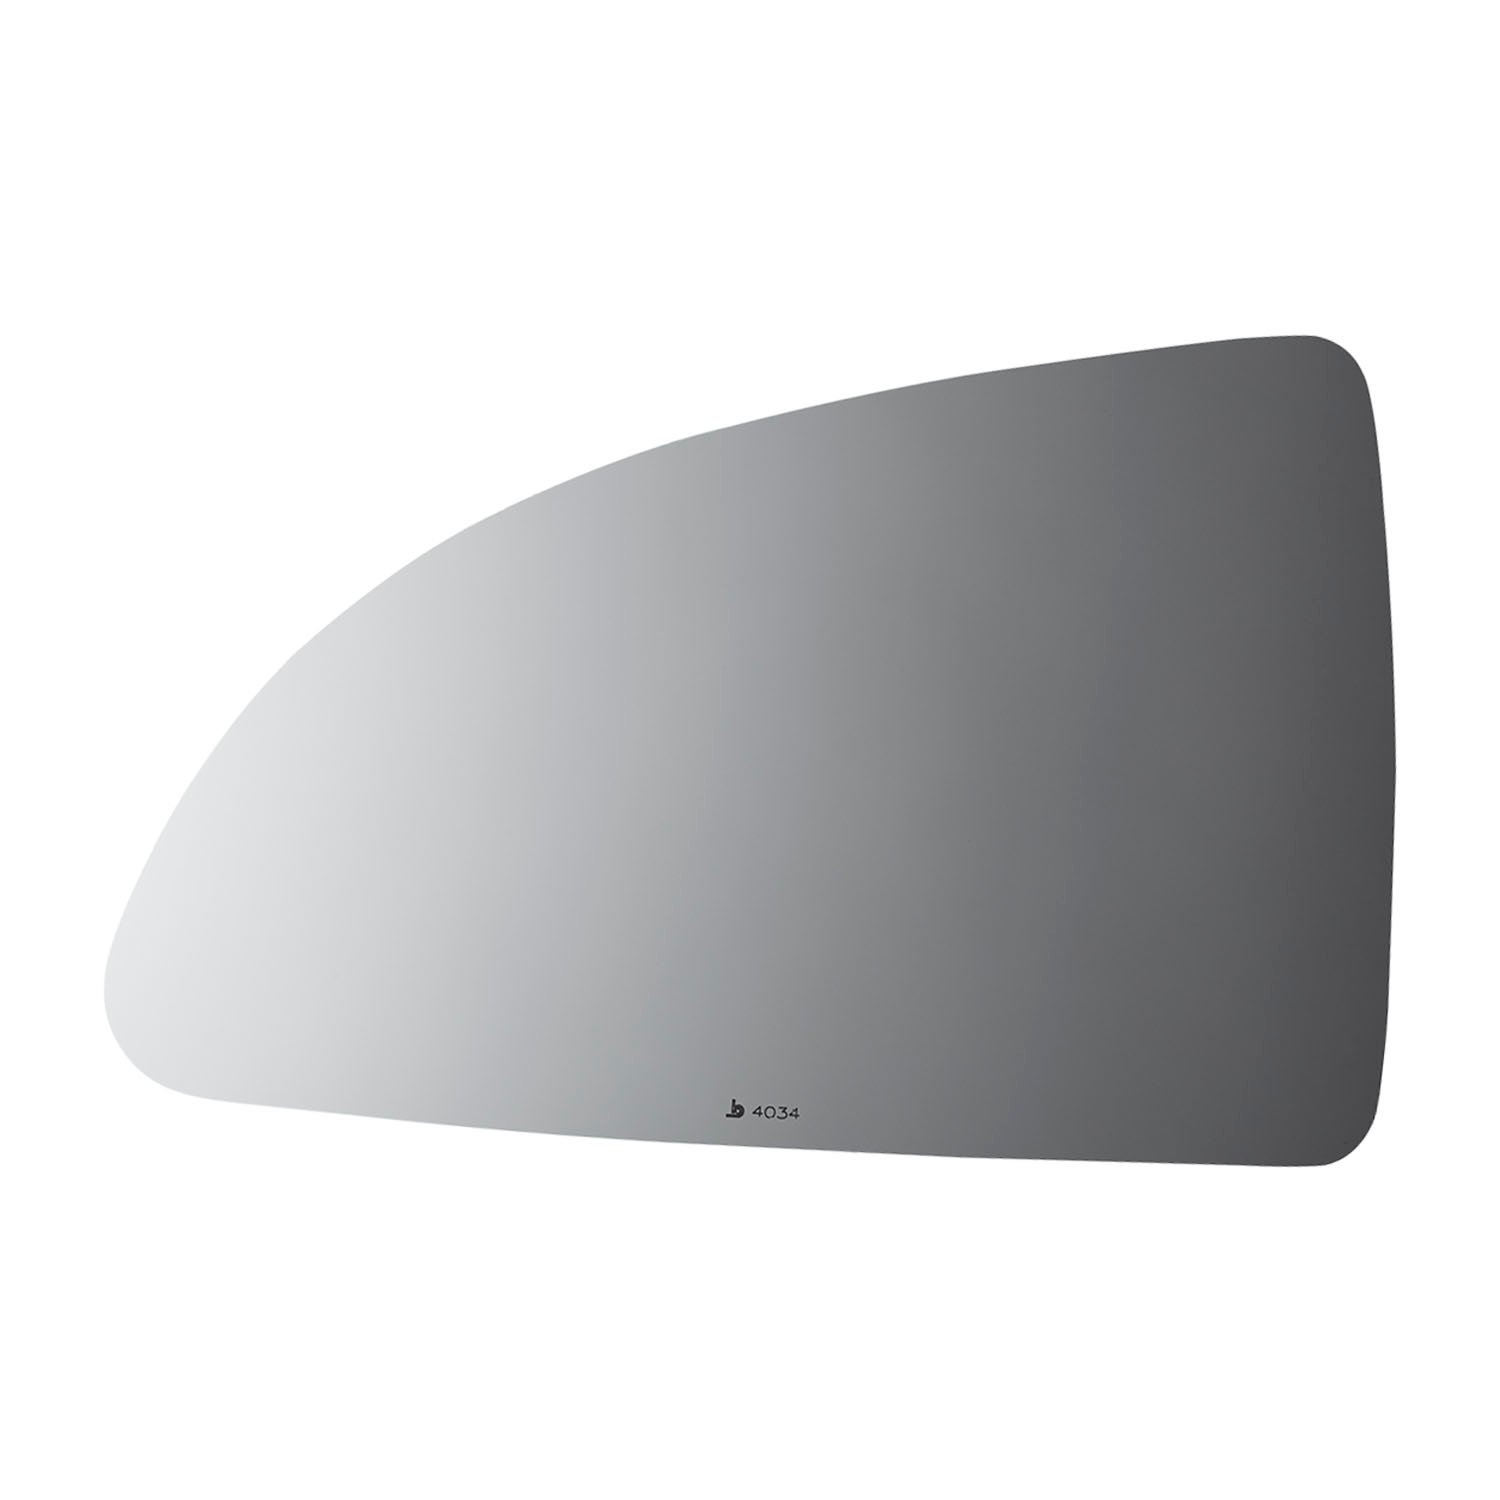 4034 SIDE VIEW MIRROR